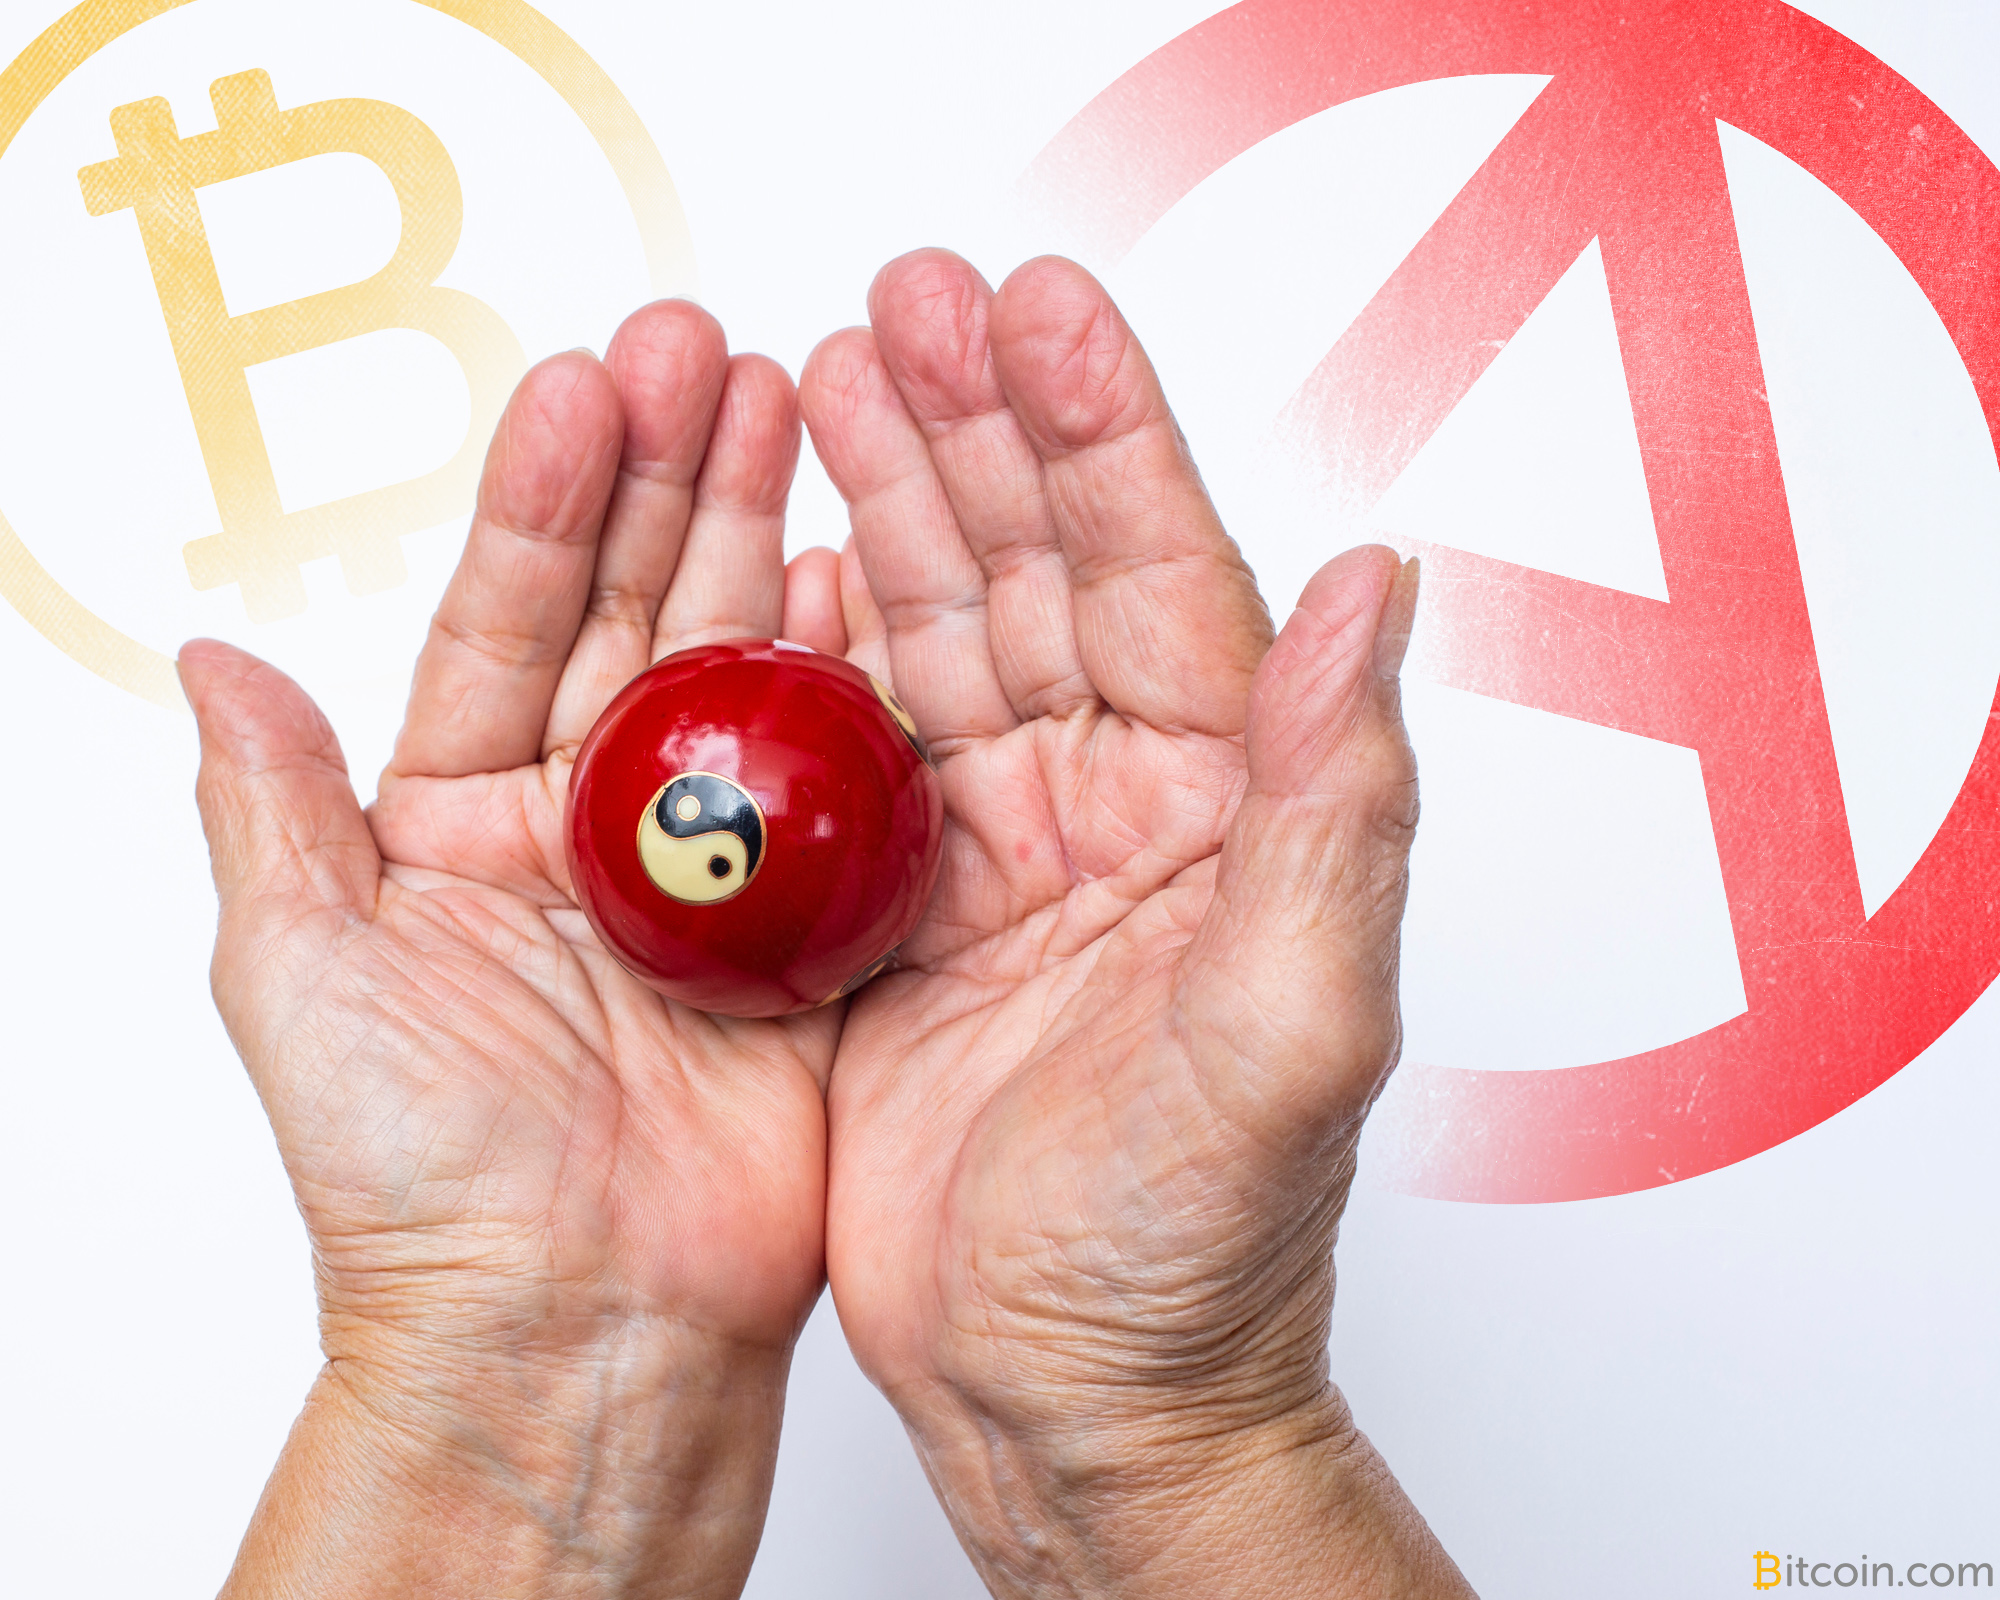 Curing the Disease of Control with Taoism and Crypto-Anarchy